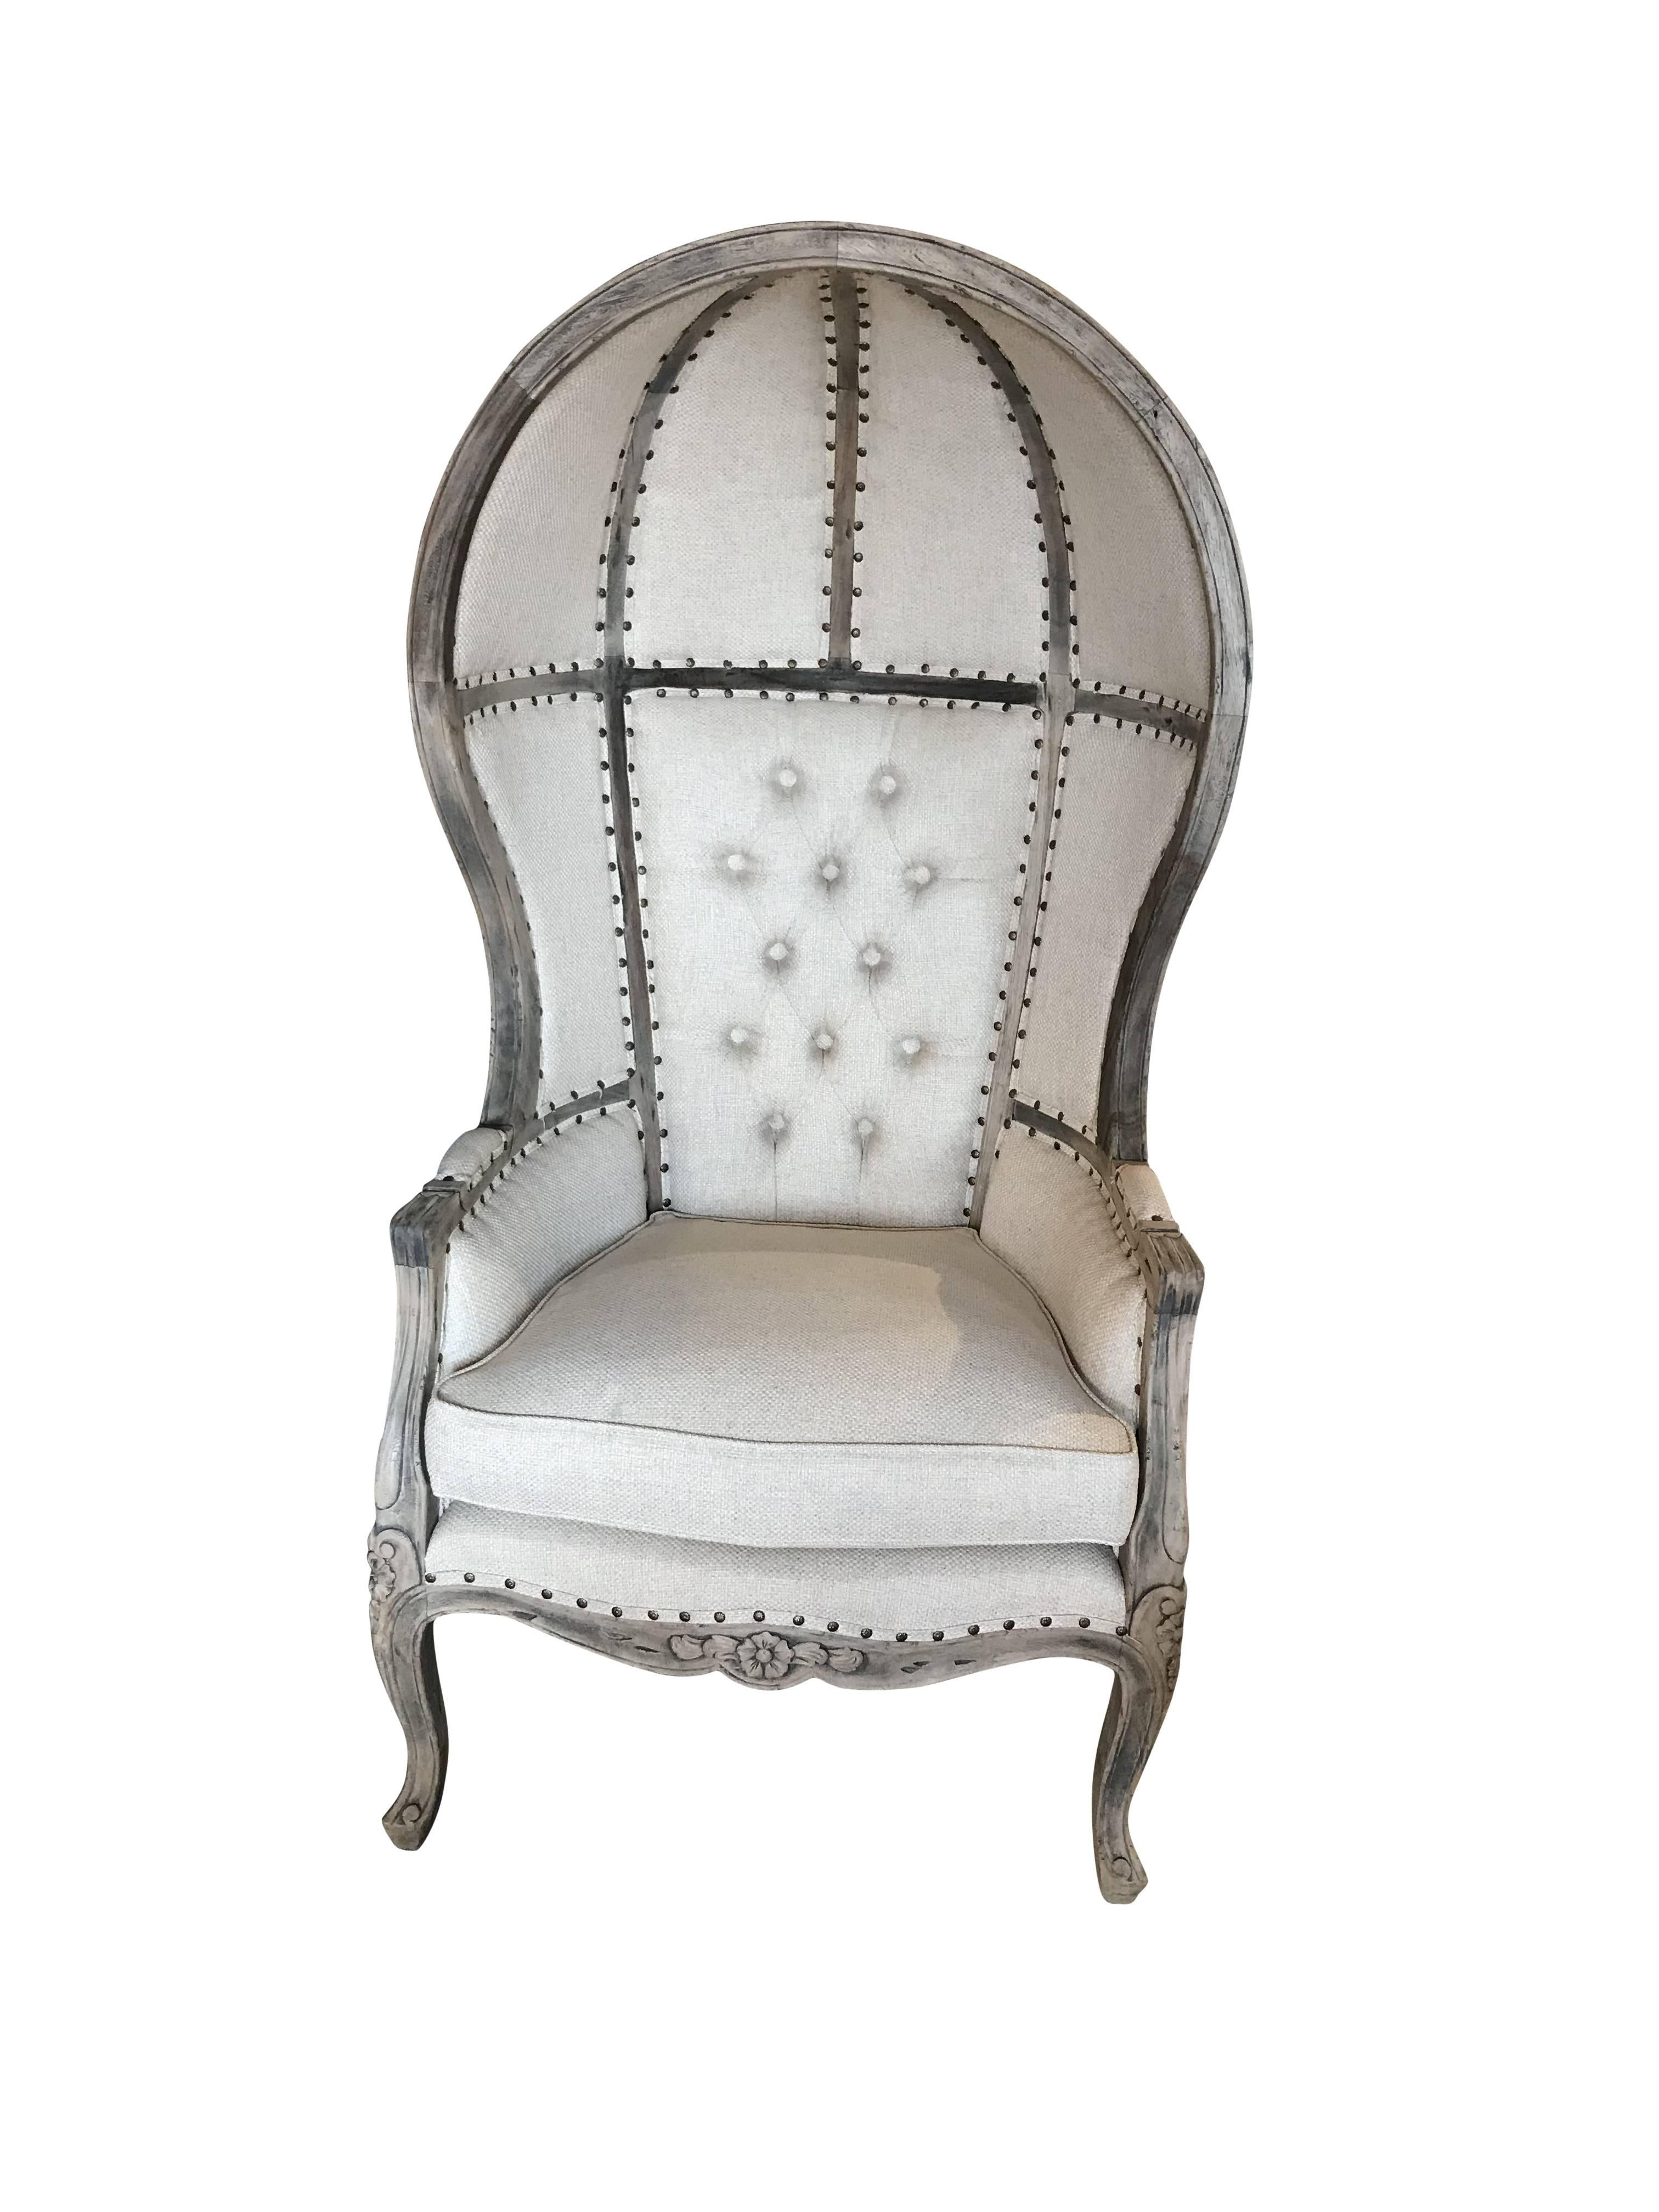 Louis XVI style French canopy or porter's chair beautifully reupholstered.